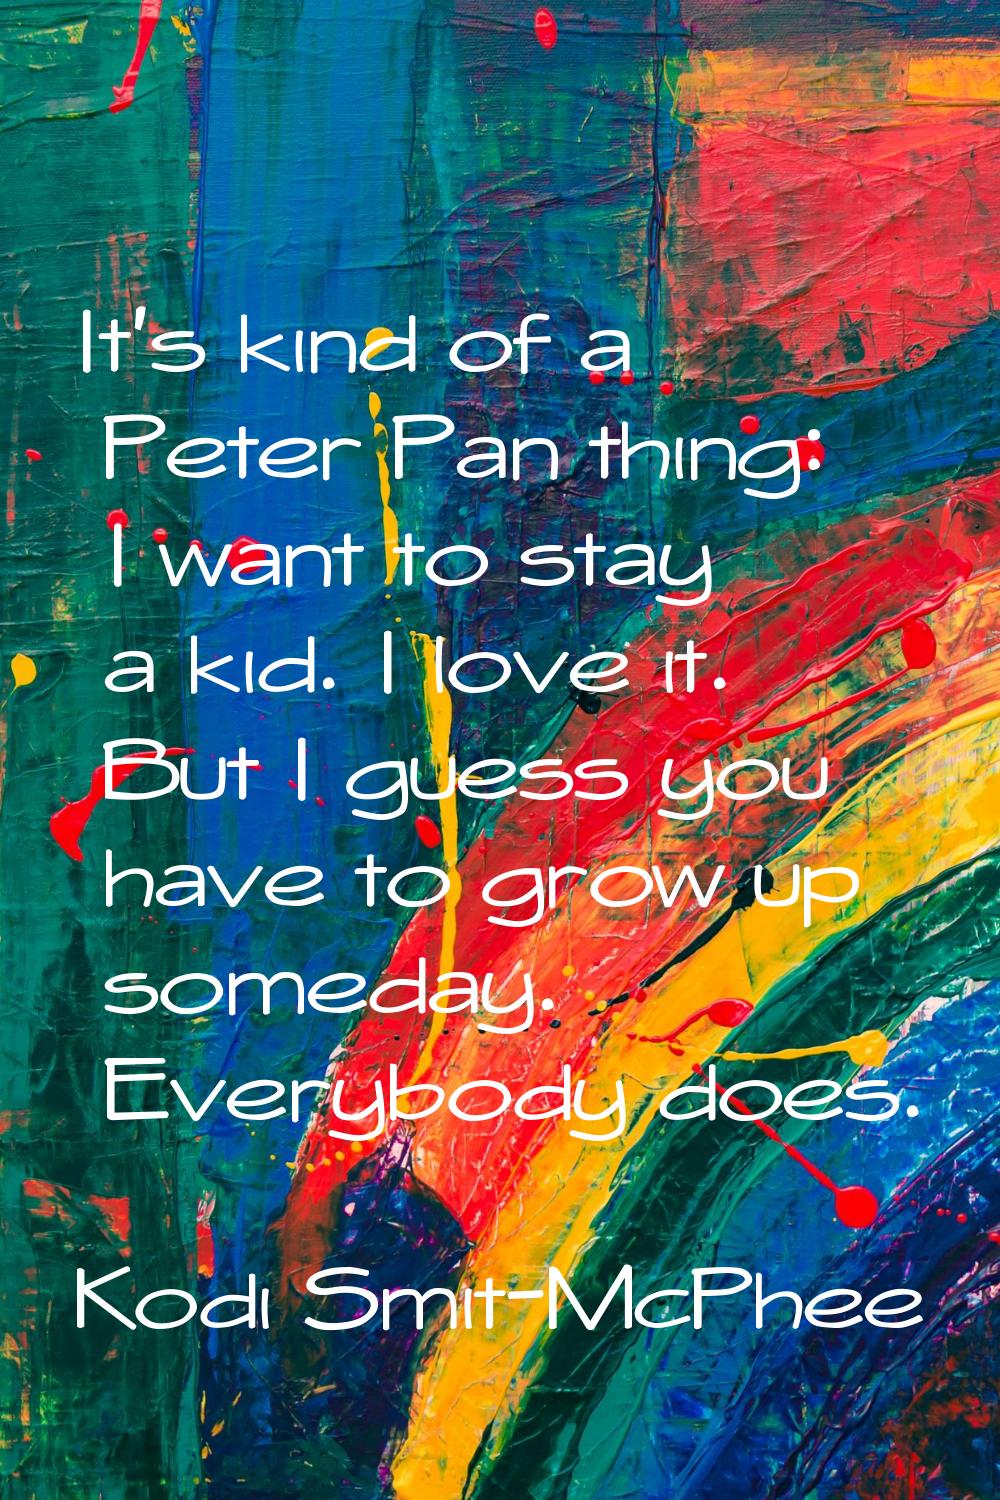 It's kind of a Peter Pan thing: I want to stay a kid. I love it. But I guess you have to grow up so